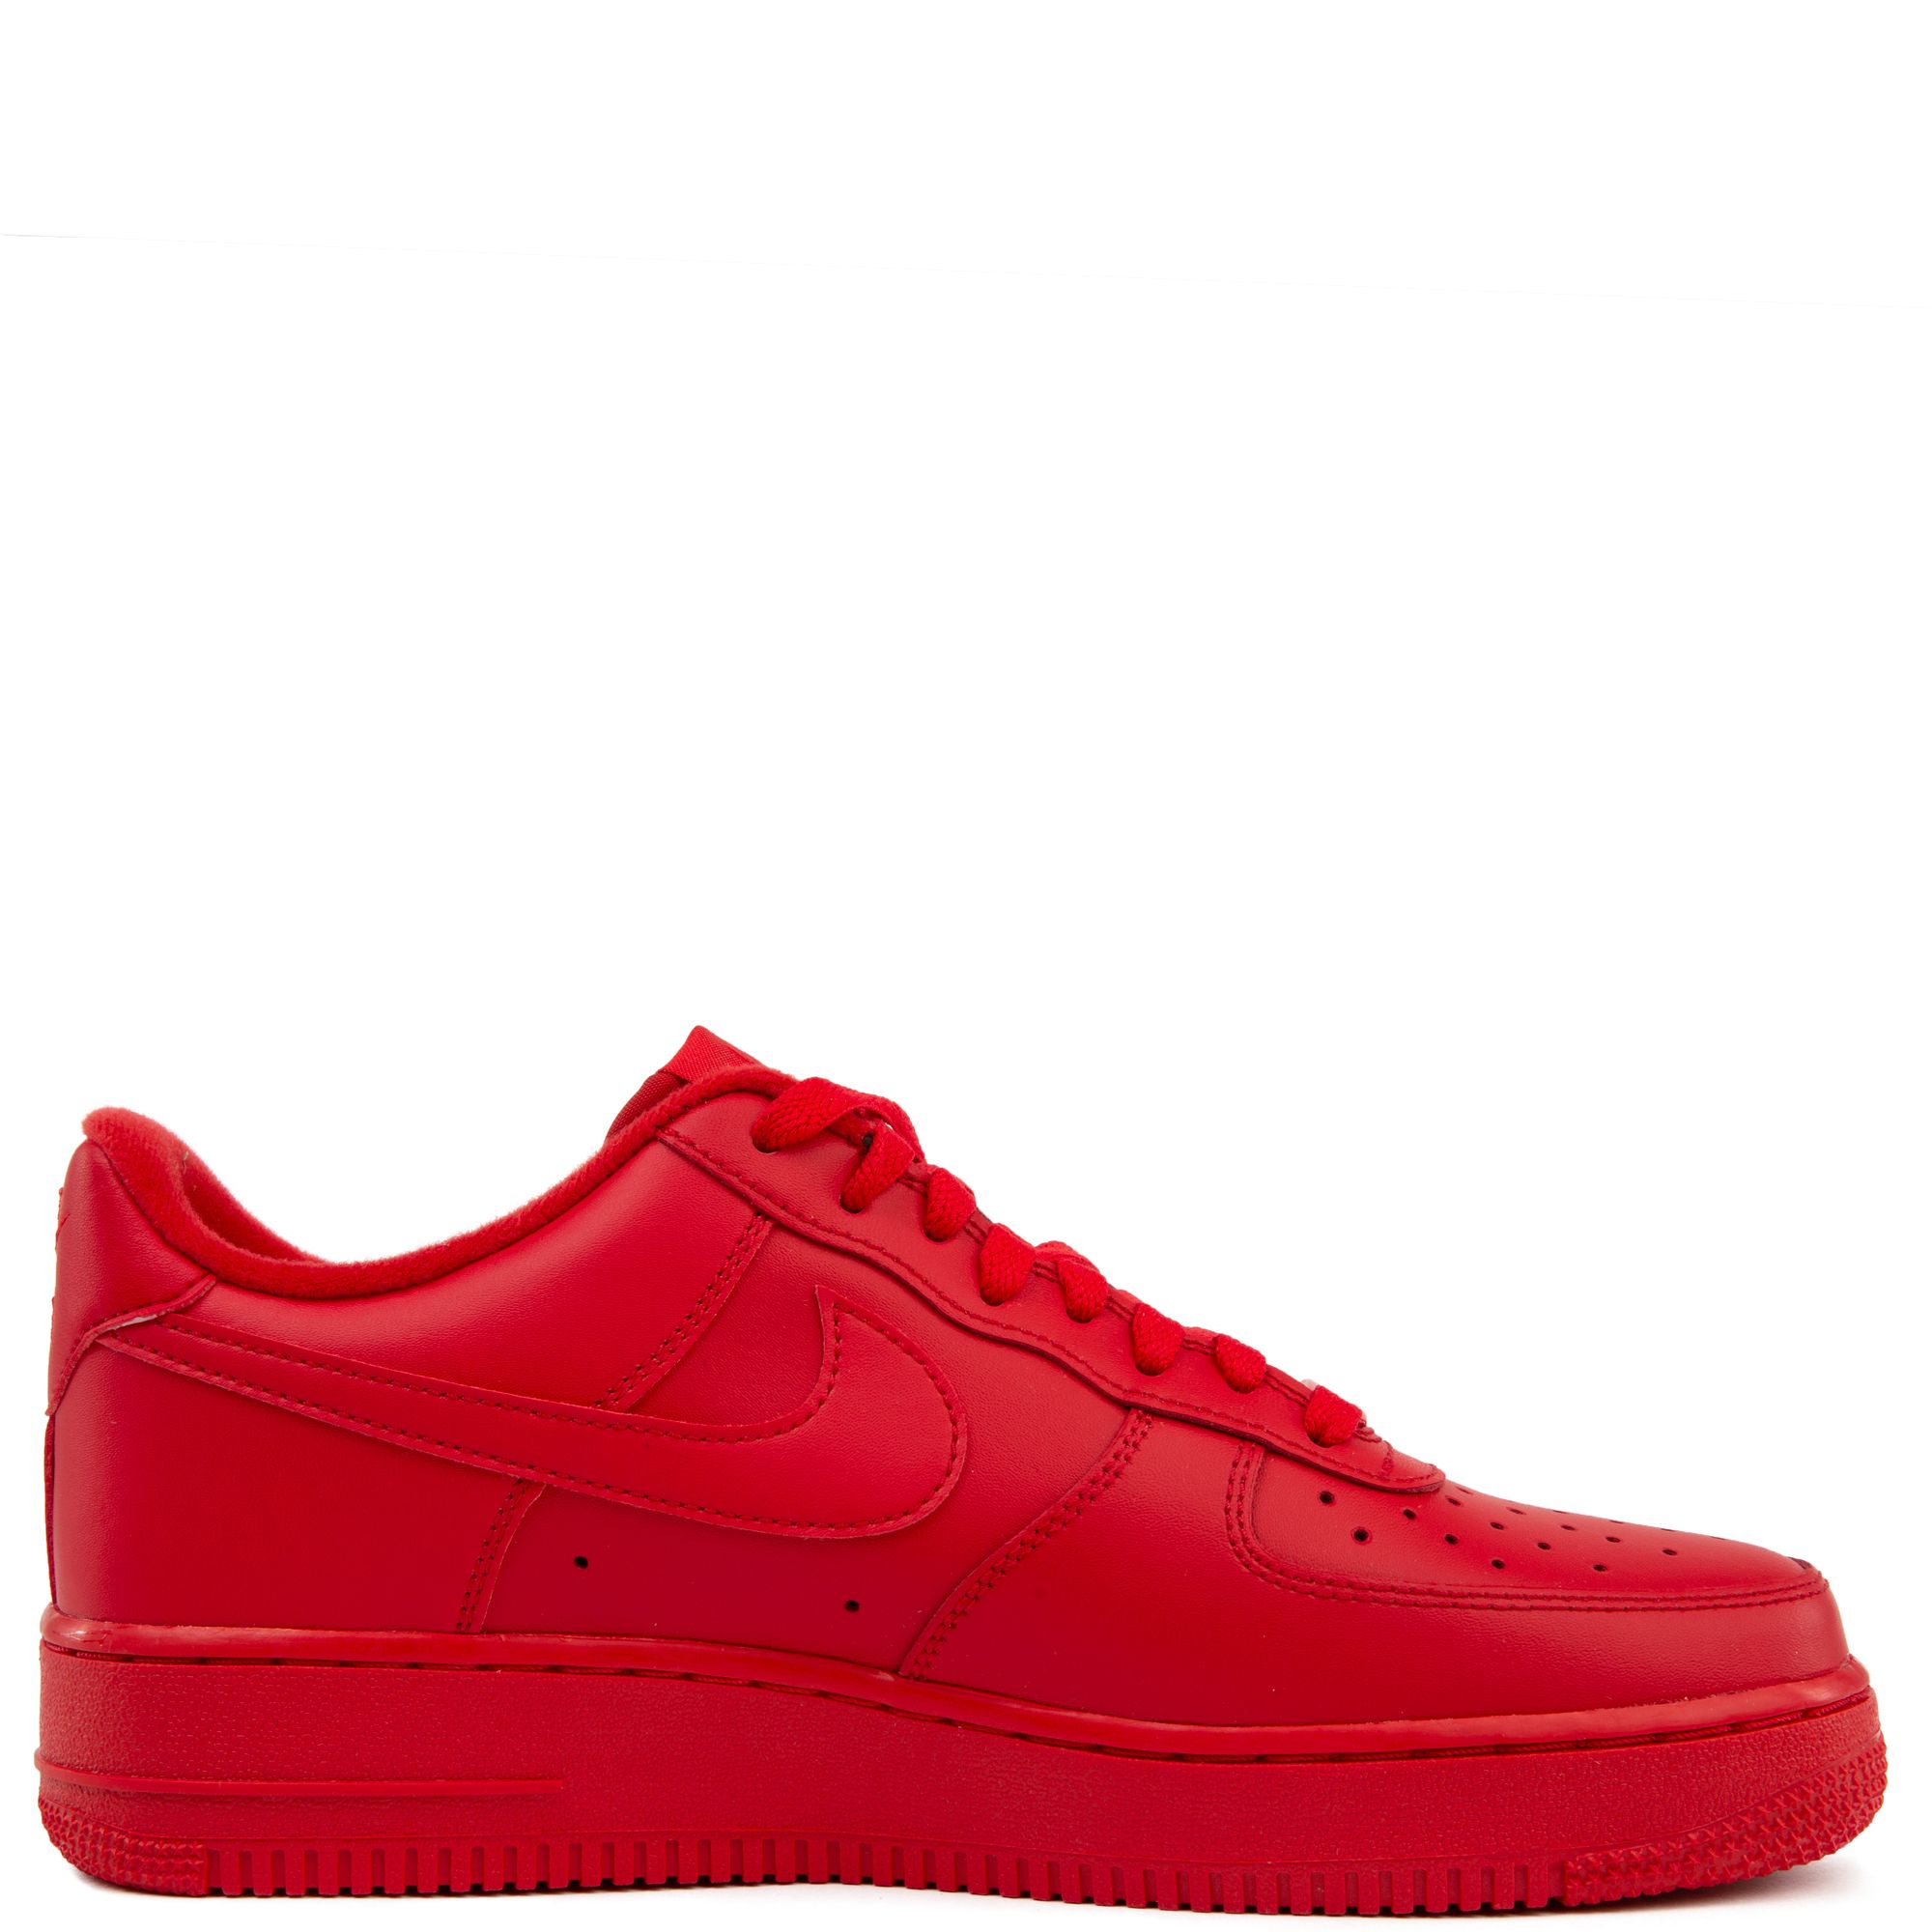 Nike Air Force 1 LV8 Team Red Black Grade School Lifestyle Shoes Red Black  FD0300-600 – Shoe Palace